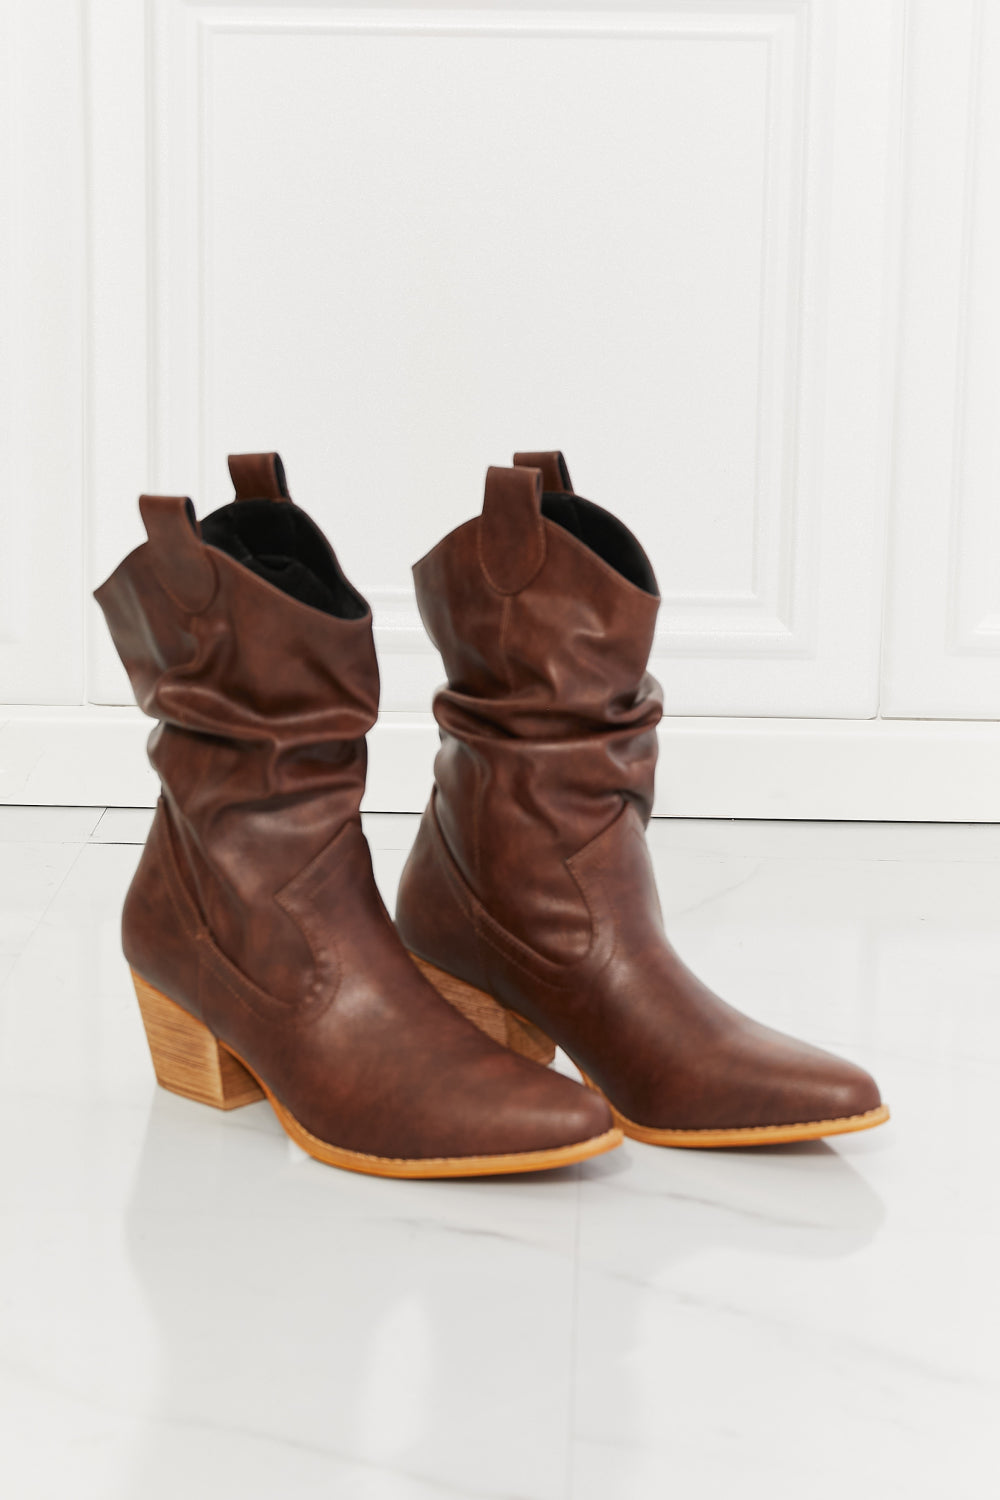 MMShoes Better in Texas Scrunch Cowboy Boots in Brown - BEAUTY COSMOTICS SHOP